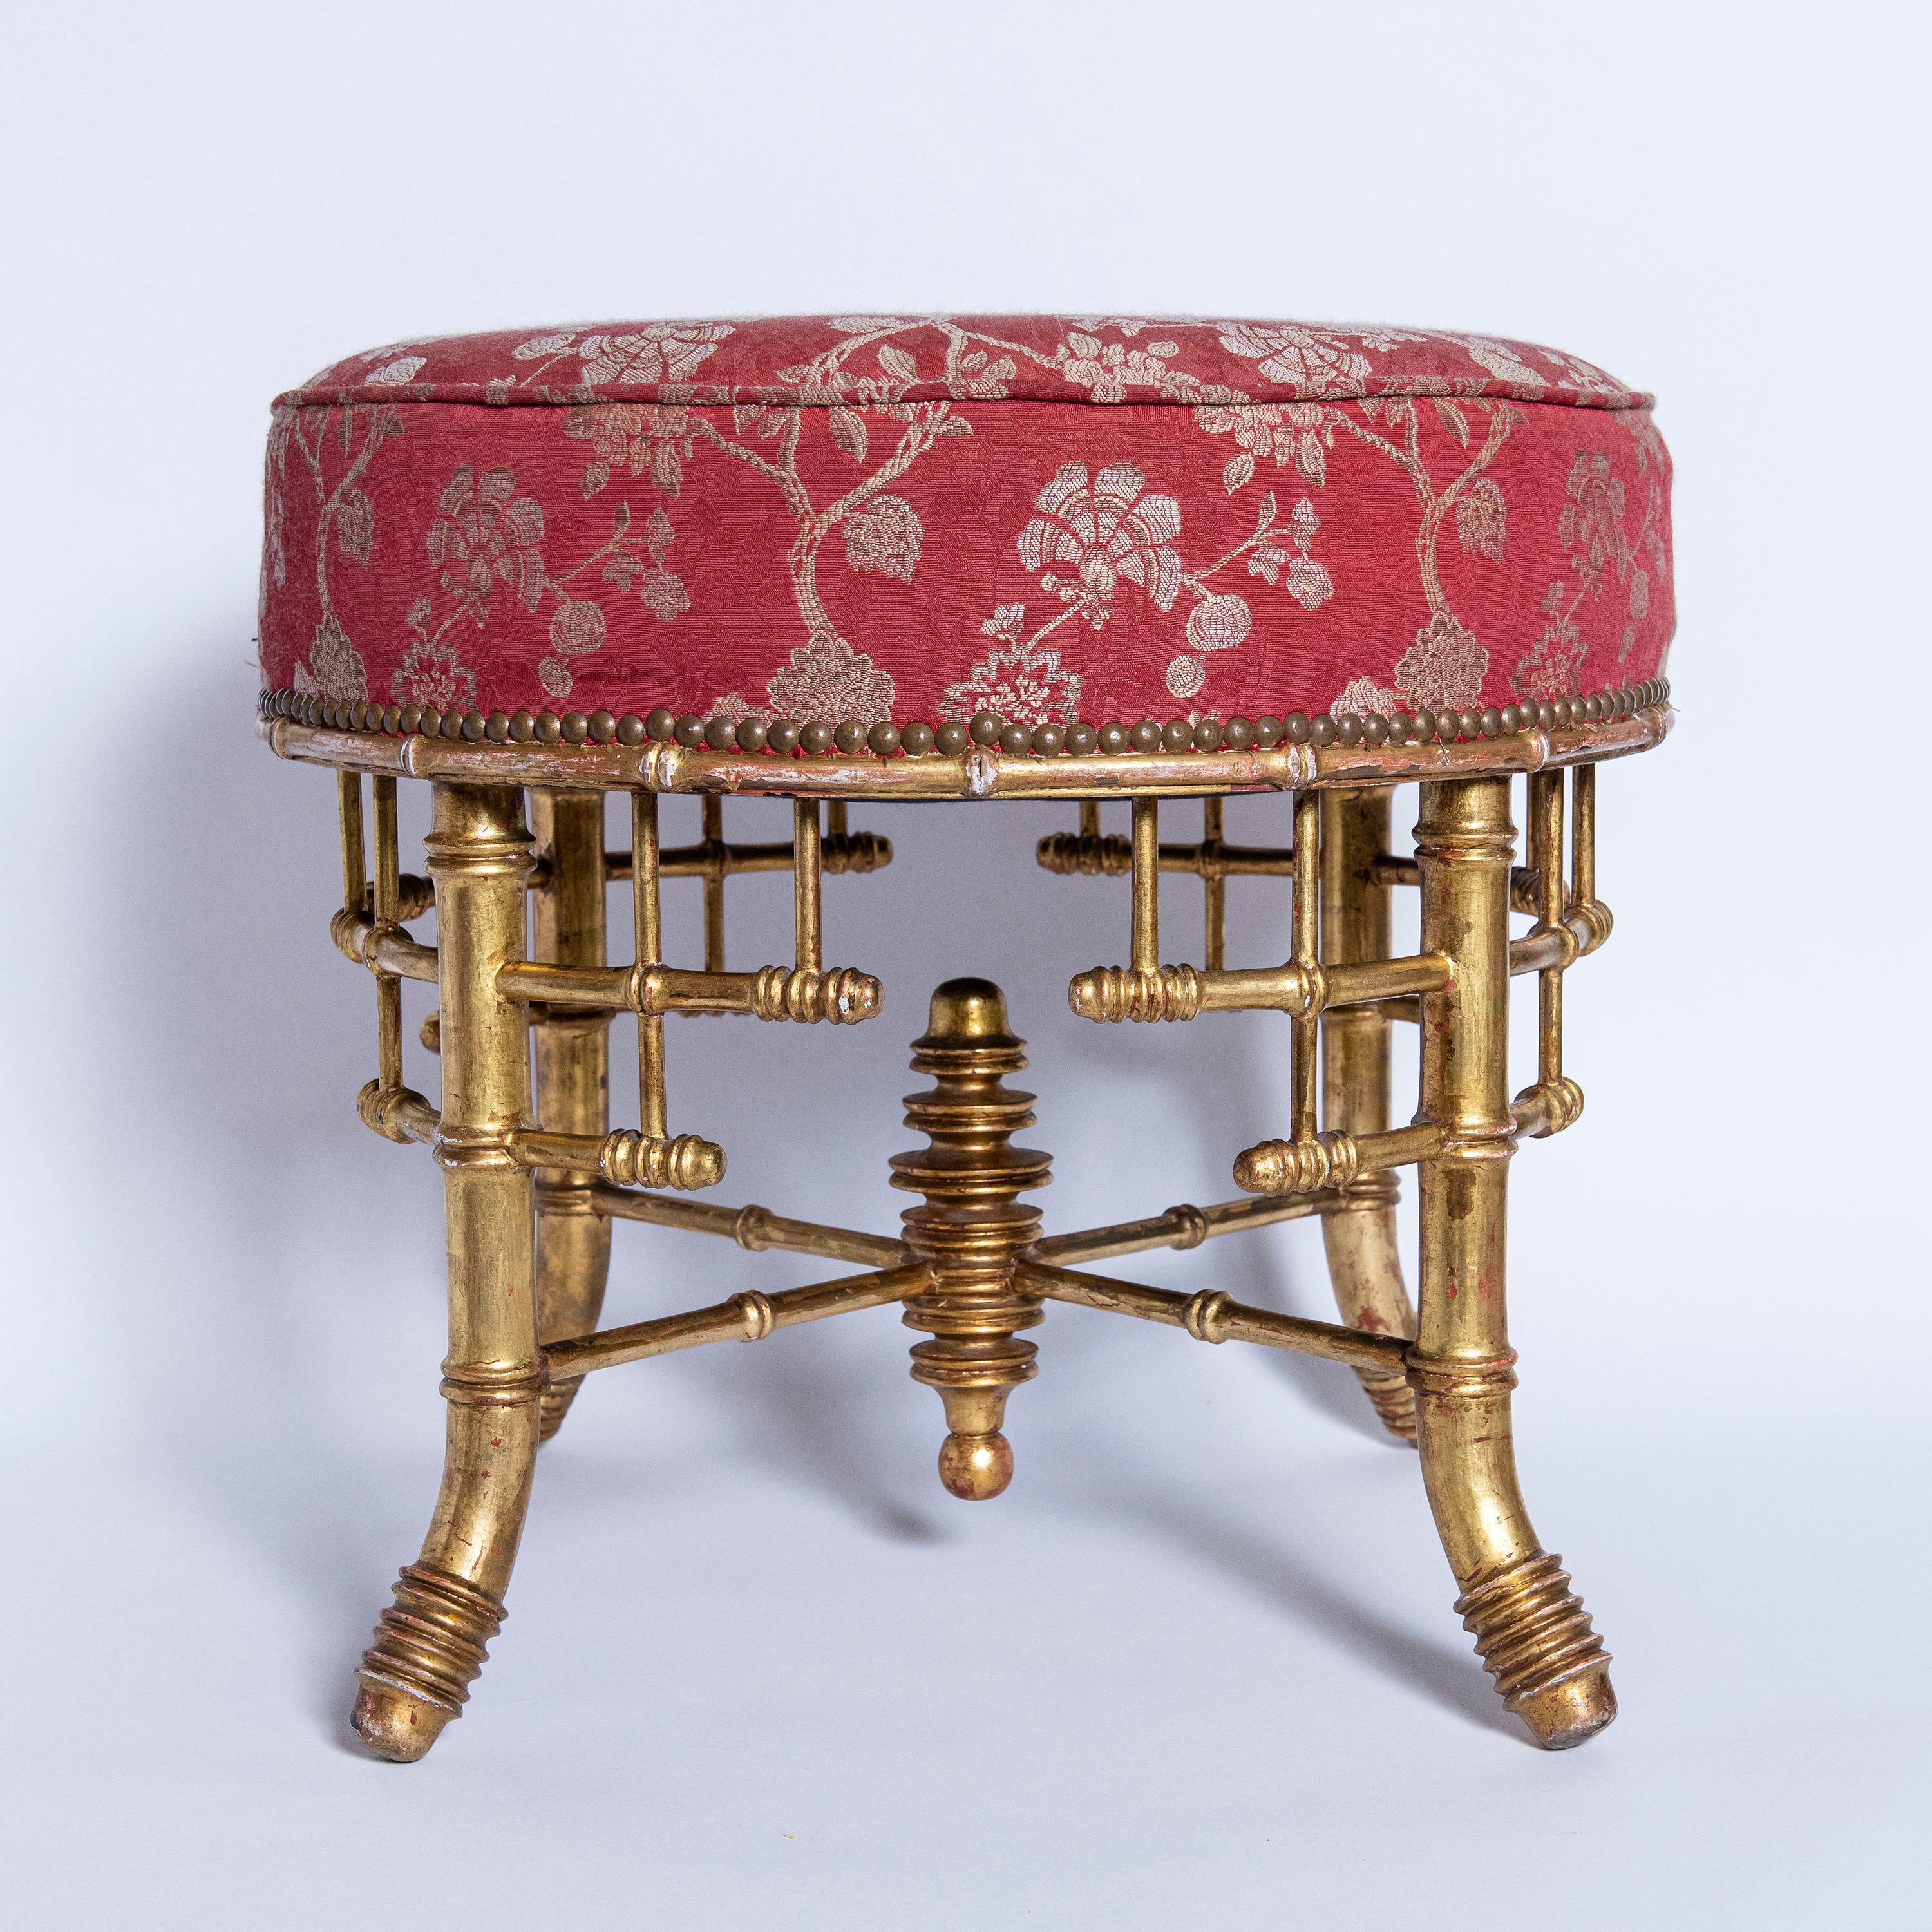 Pair of faux bamboo and gold leaf stools, England, late 19th century.